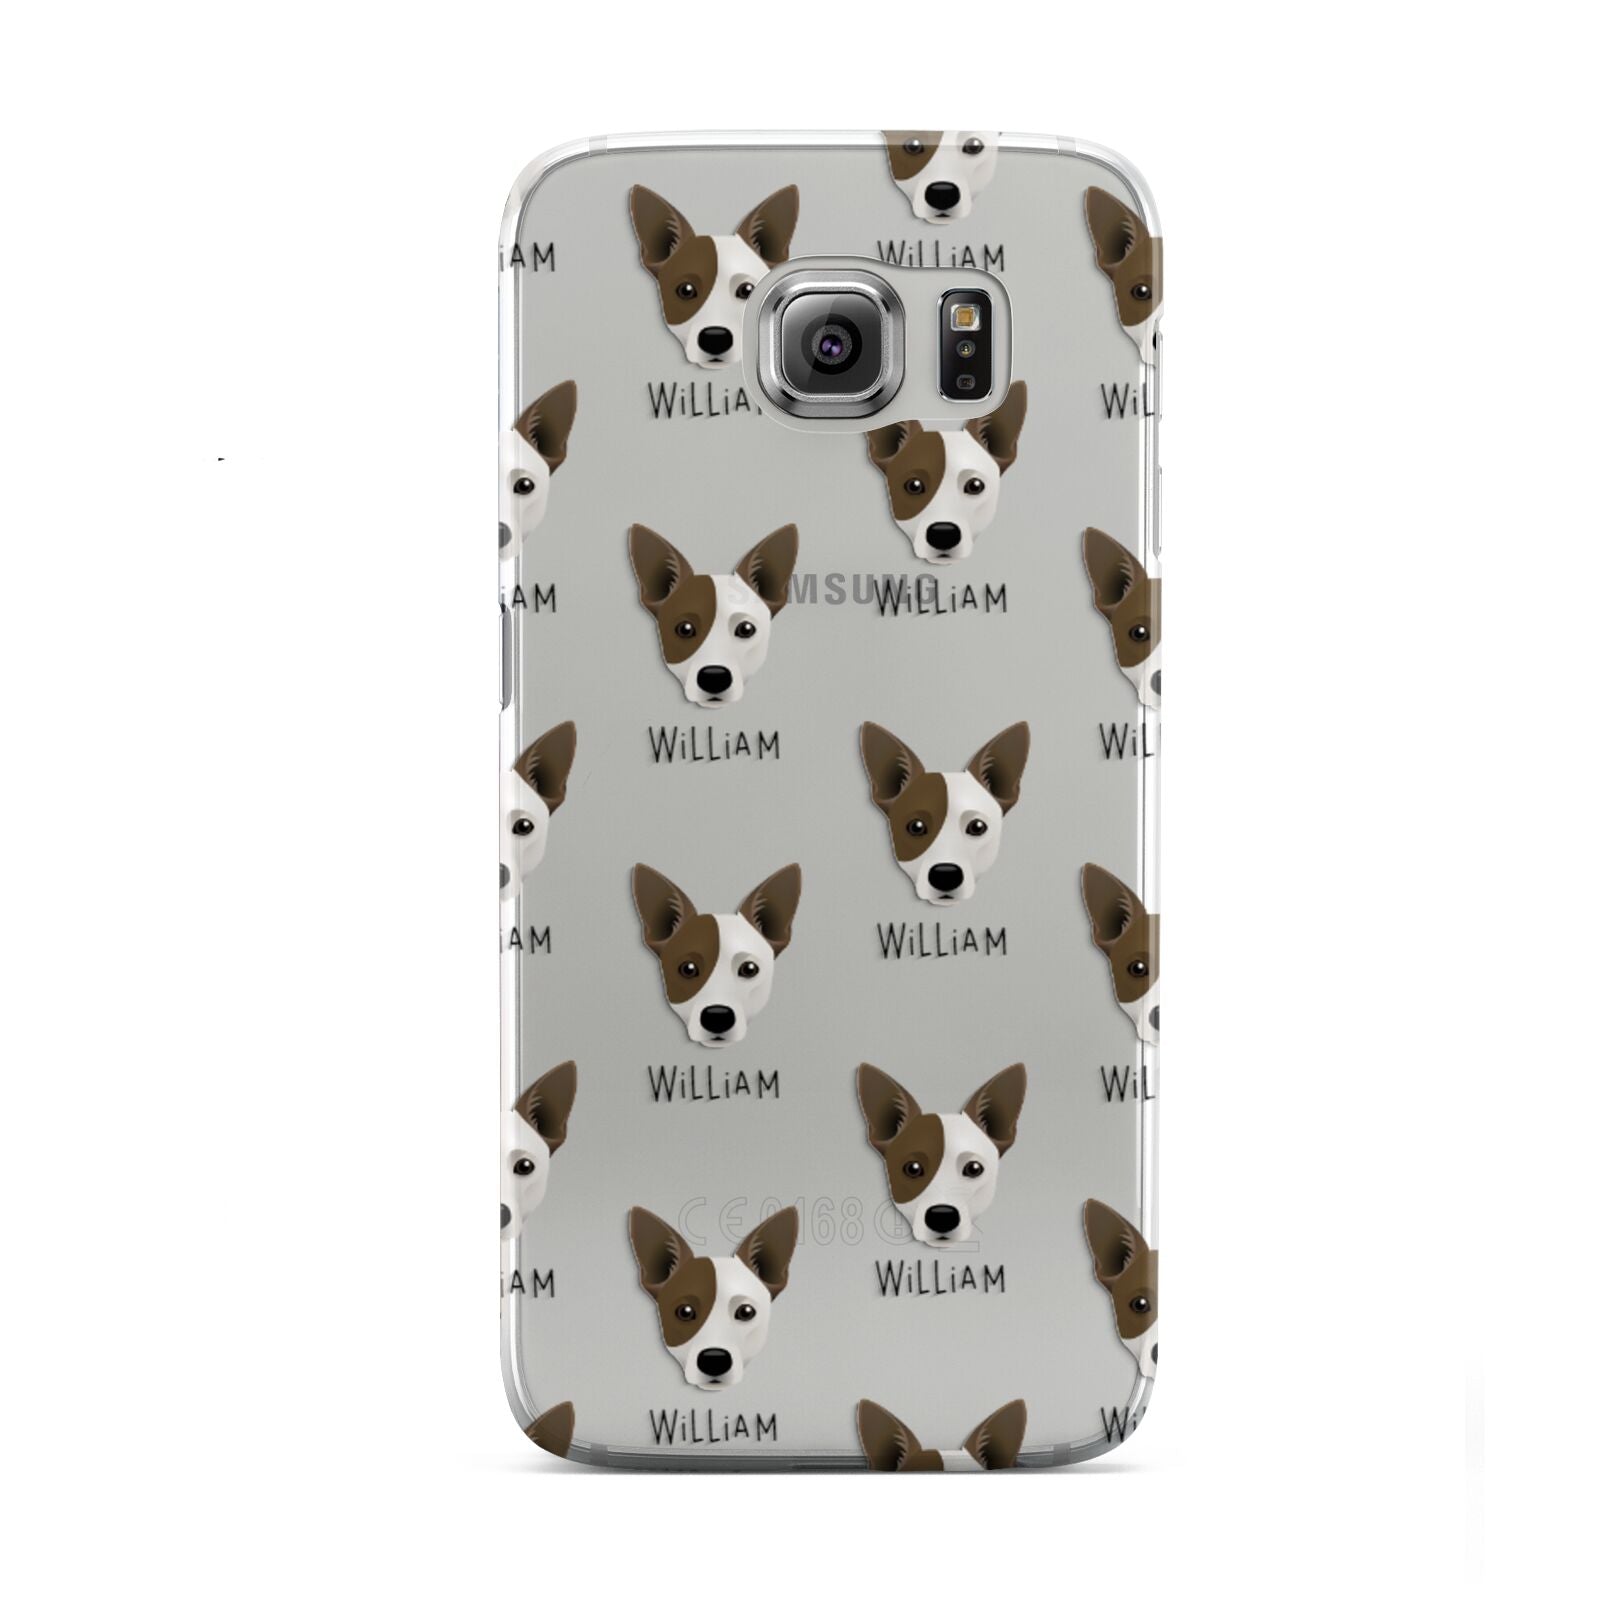 Cojack Icon with Name Samsung Galaxy S6 Case